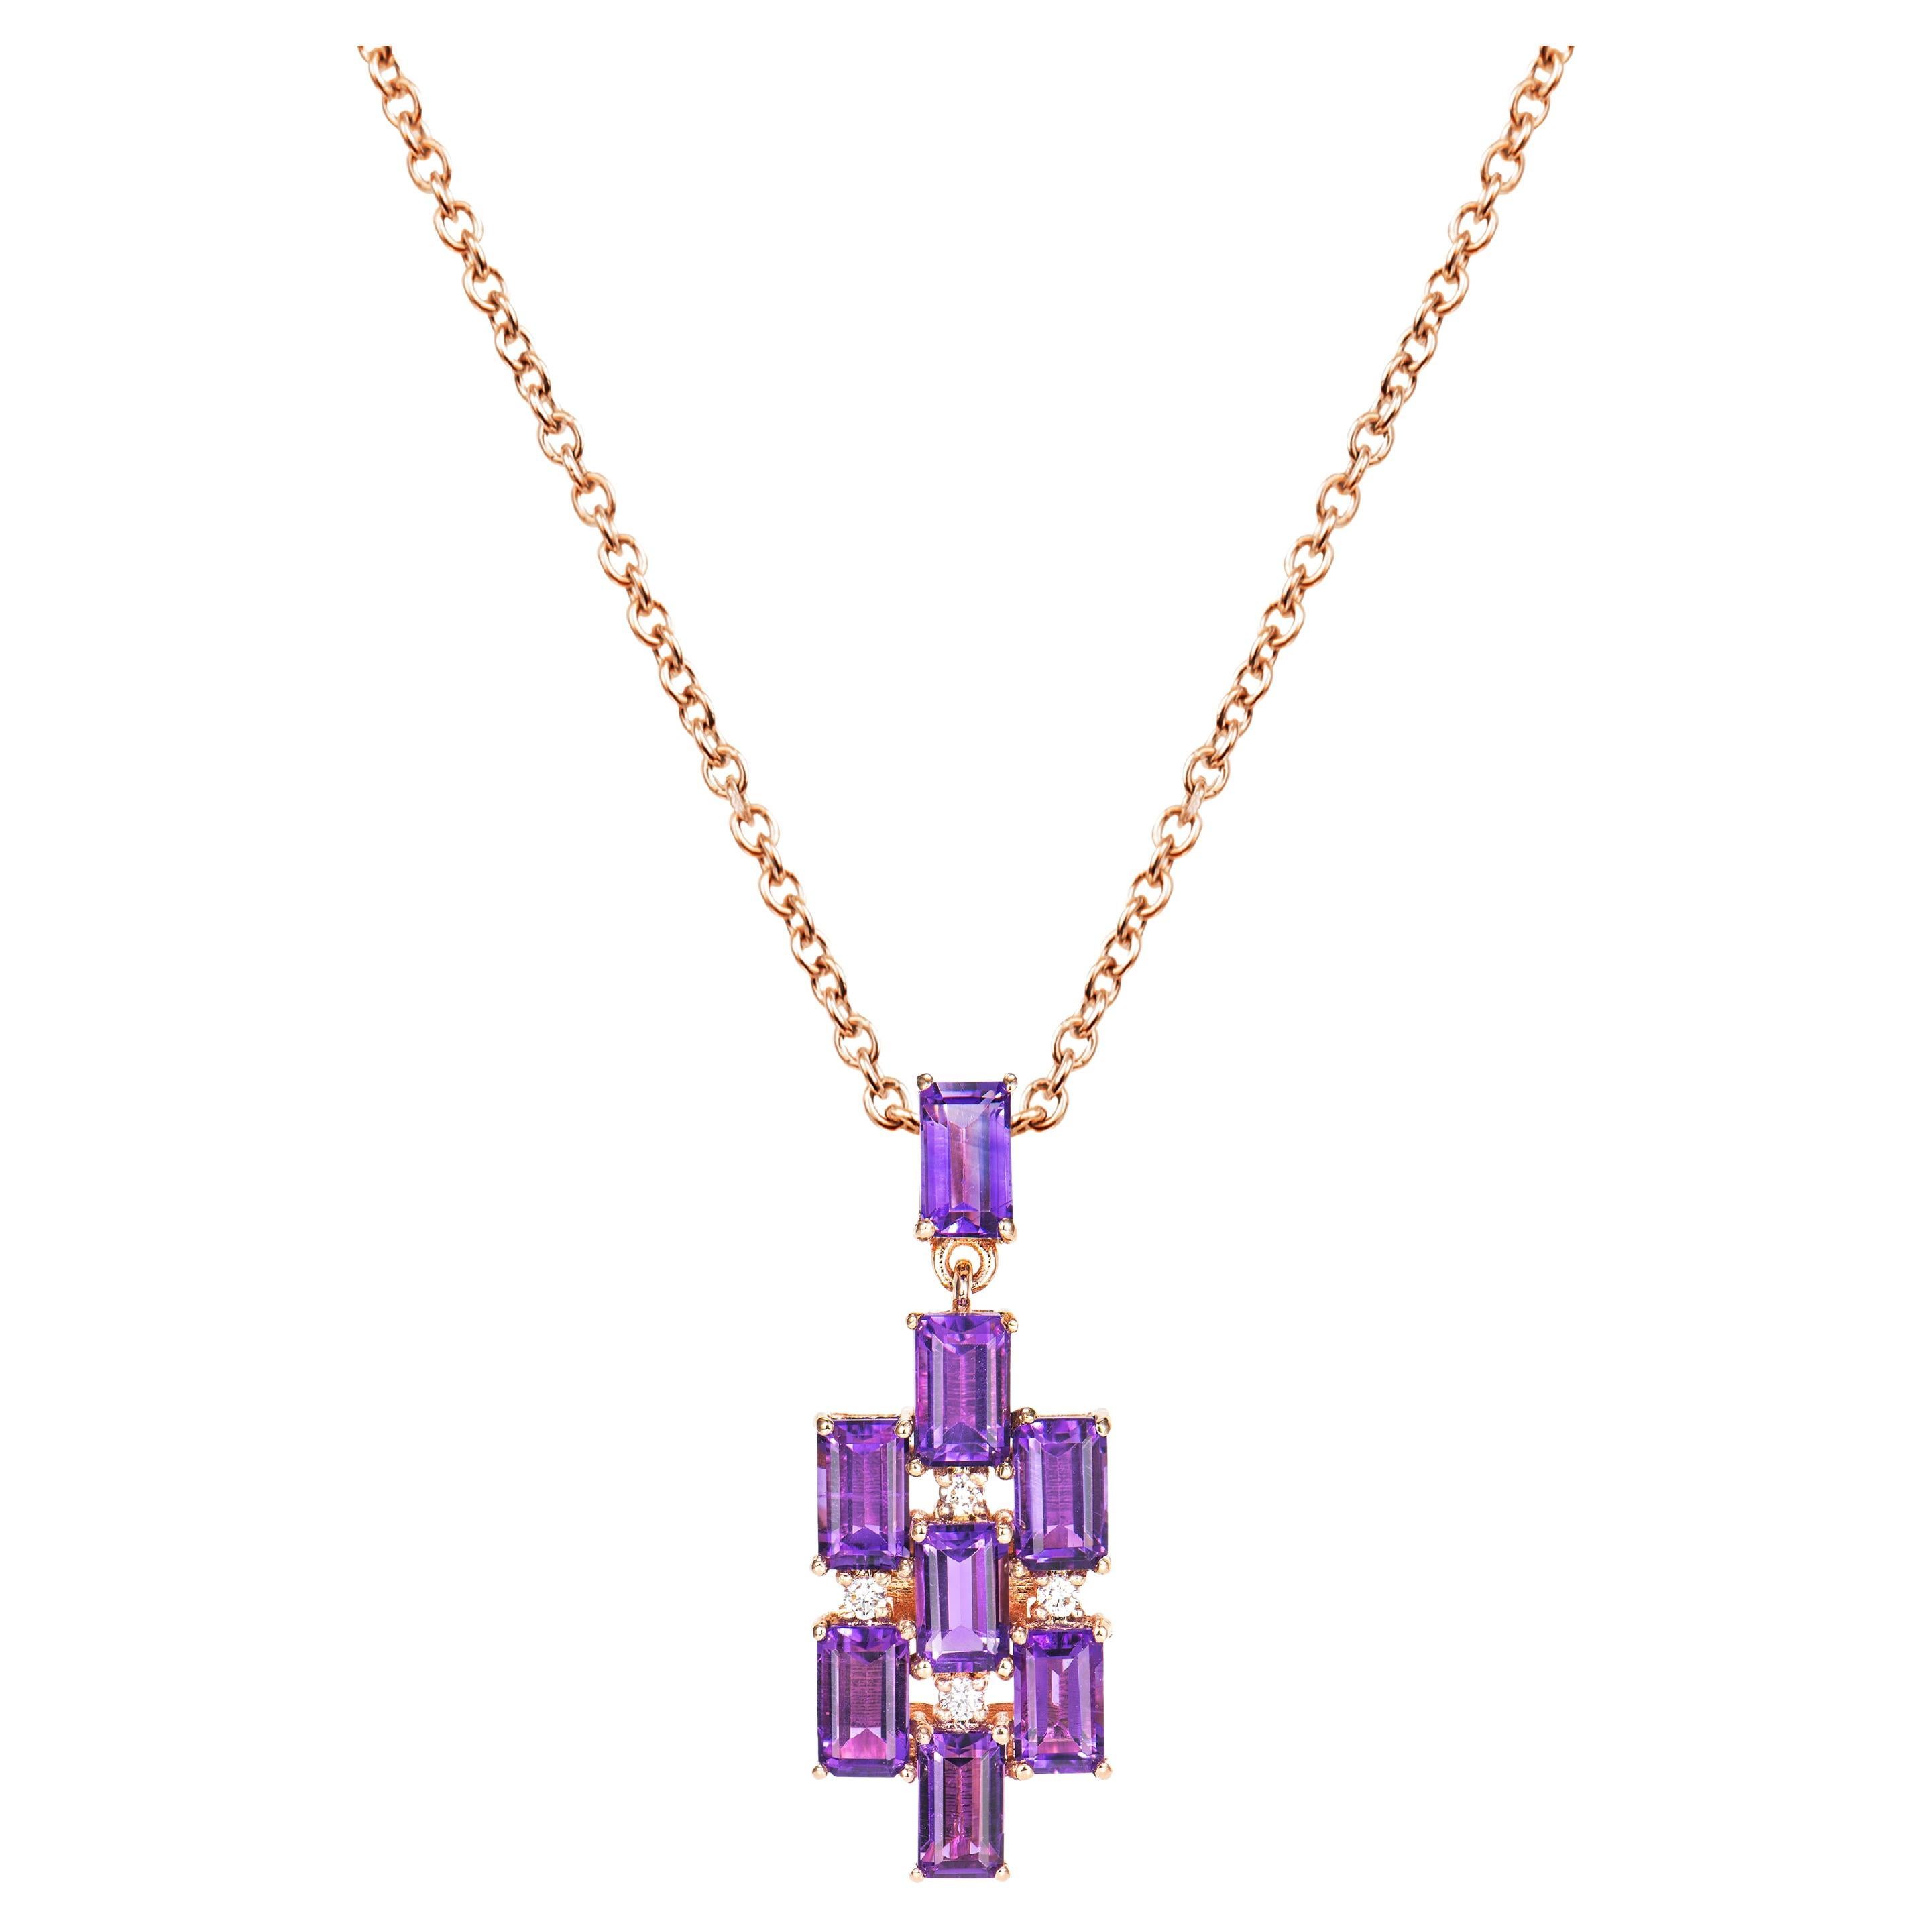 2.70 Carat Amethyst Pendant in 18Karat Rose Gold with White Diamond. For Sale